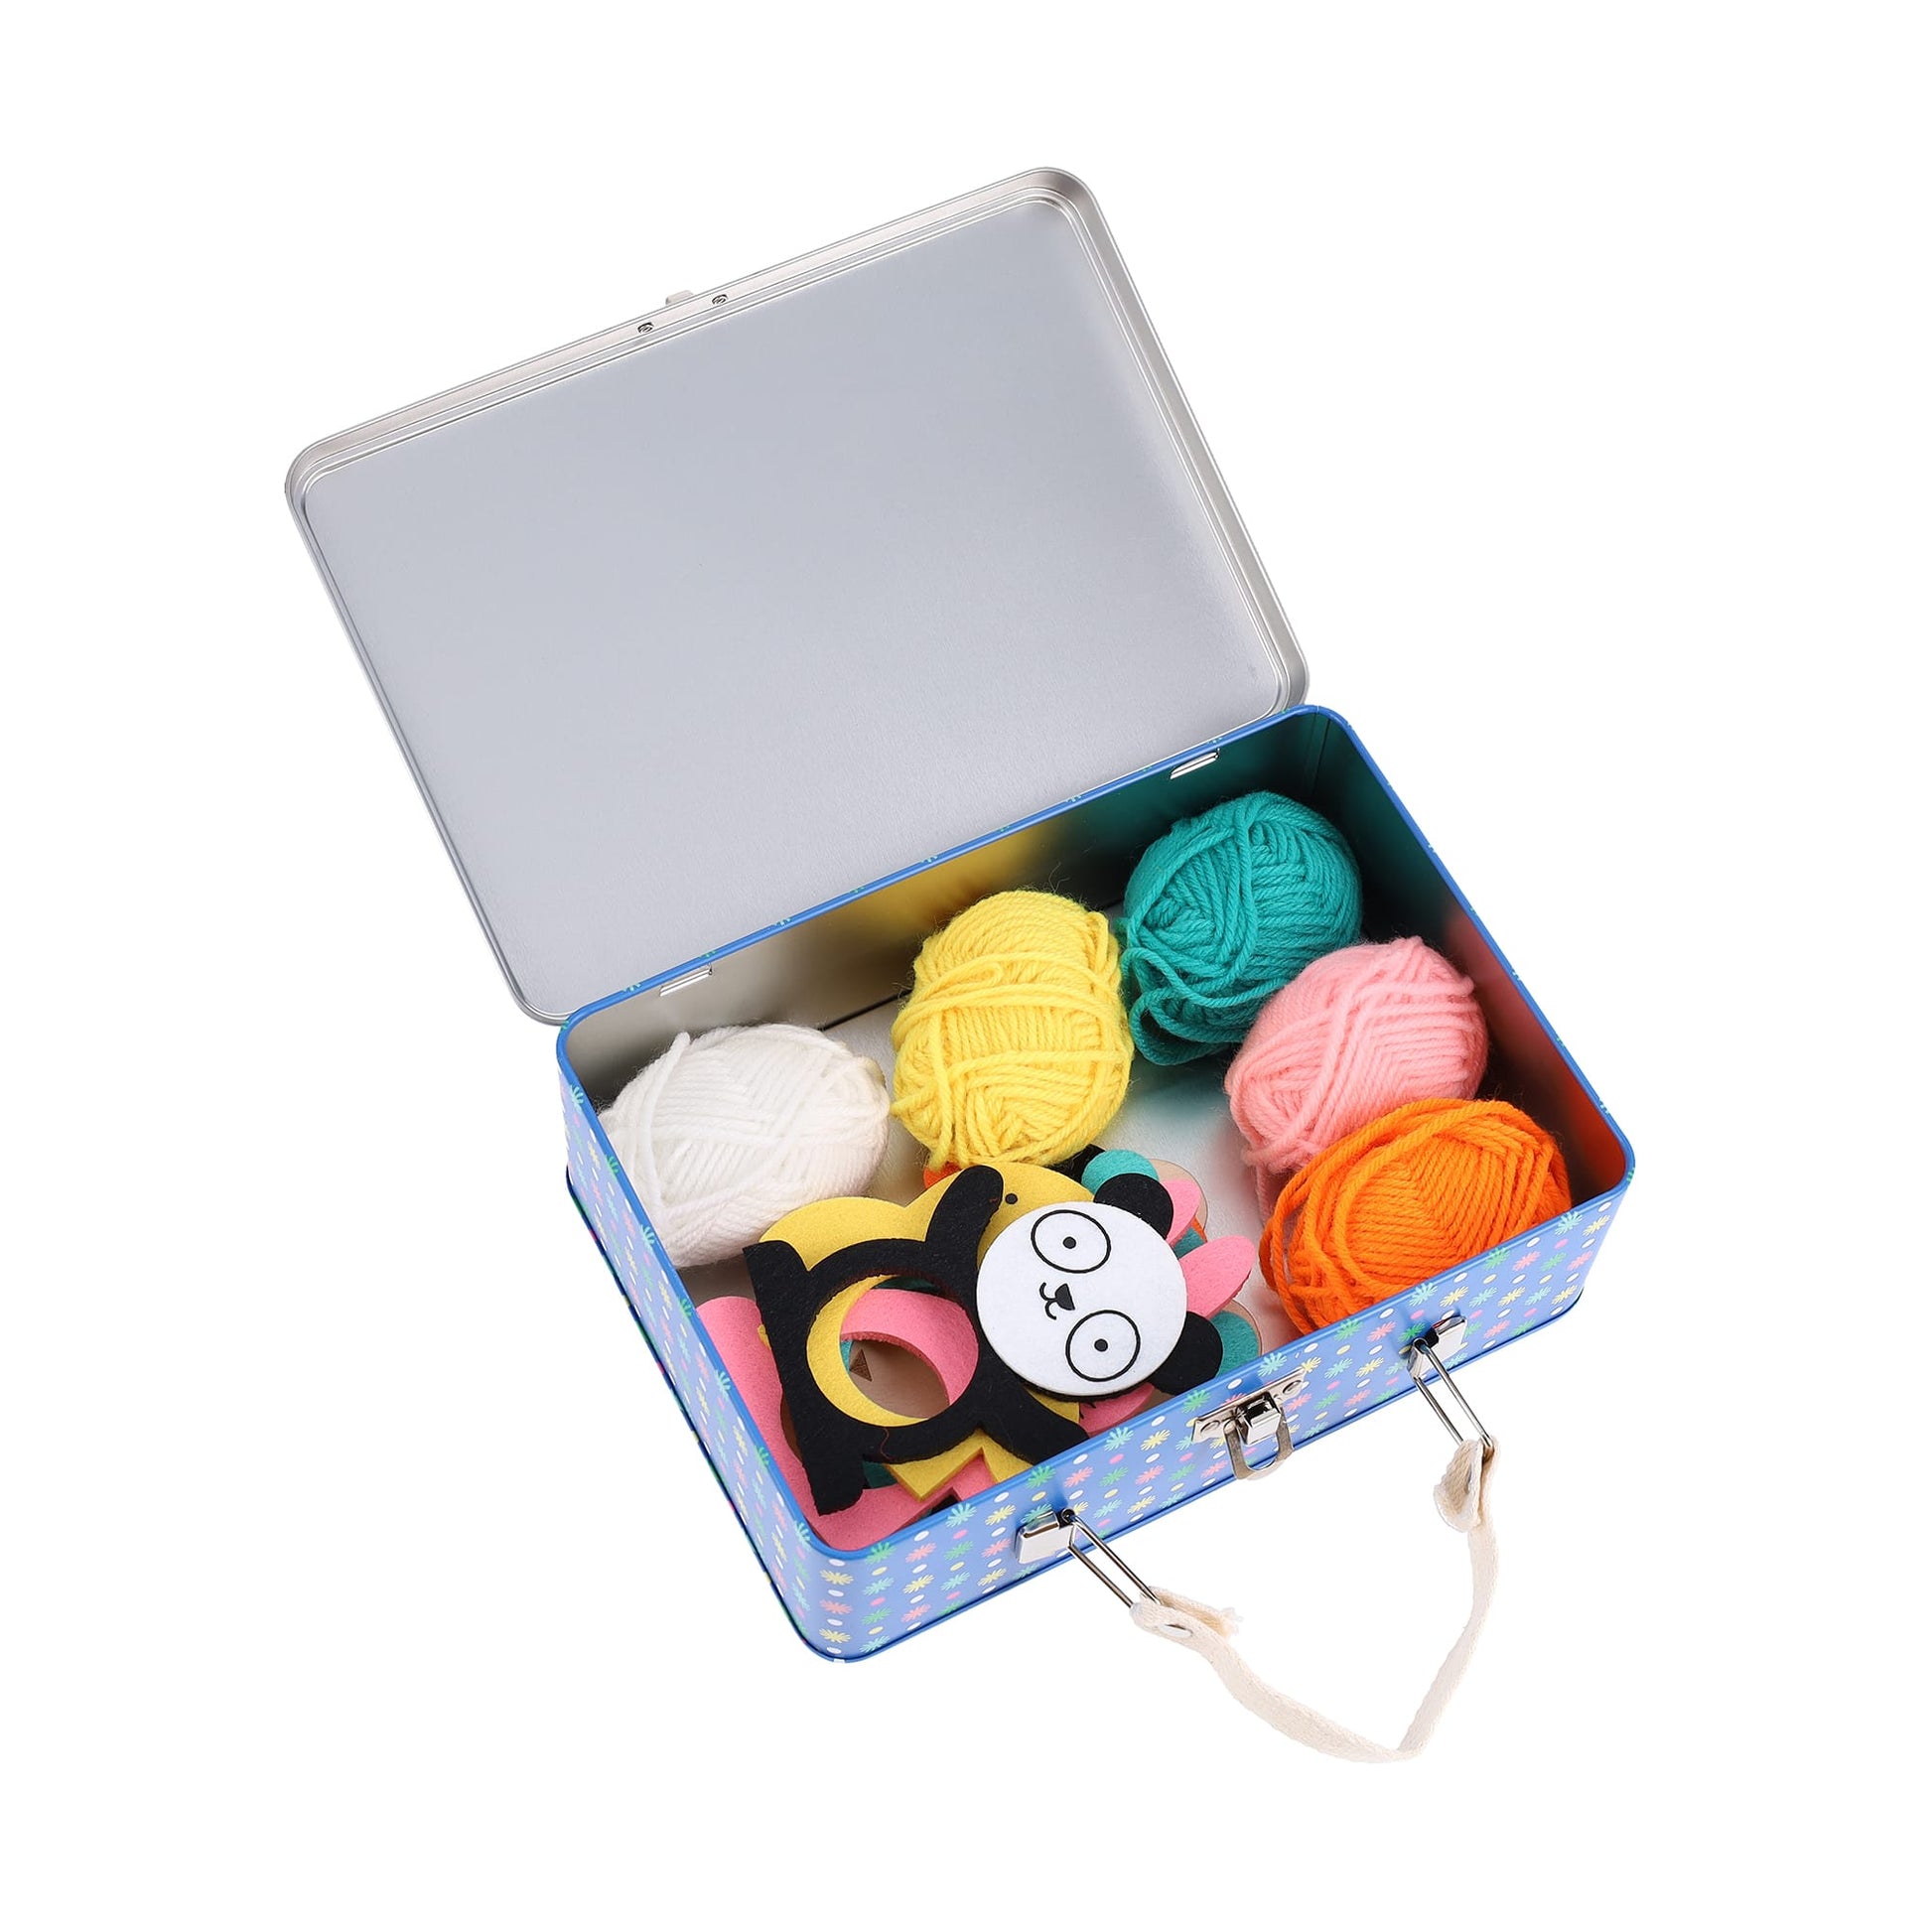 This fun, portable kit comes with everything you need to create the sweet bunny, bird, koala, panda, and puppy. Inside you'll find five colored yarns, five felt animal forms, a wooden pom-pom maker, and instructions in six languages (English, Dutch, French, German, Italian, and Spanish).